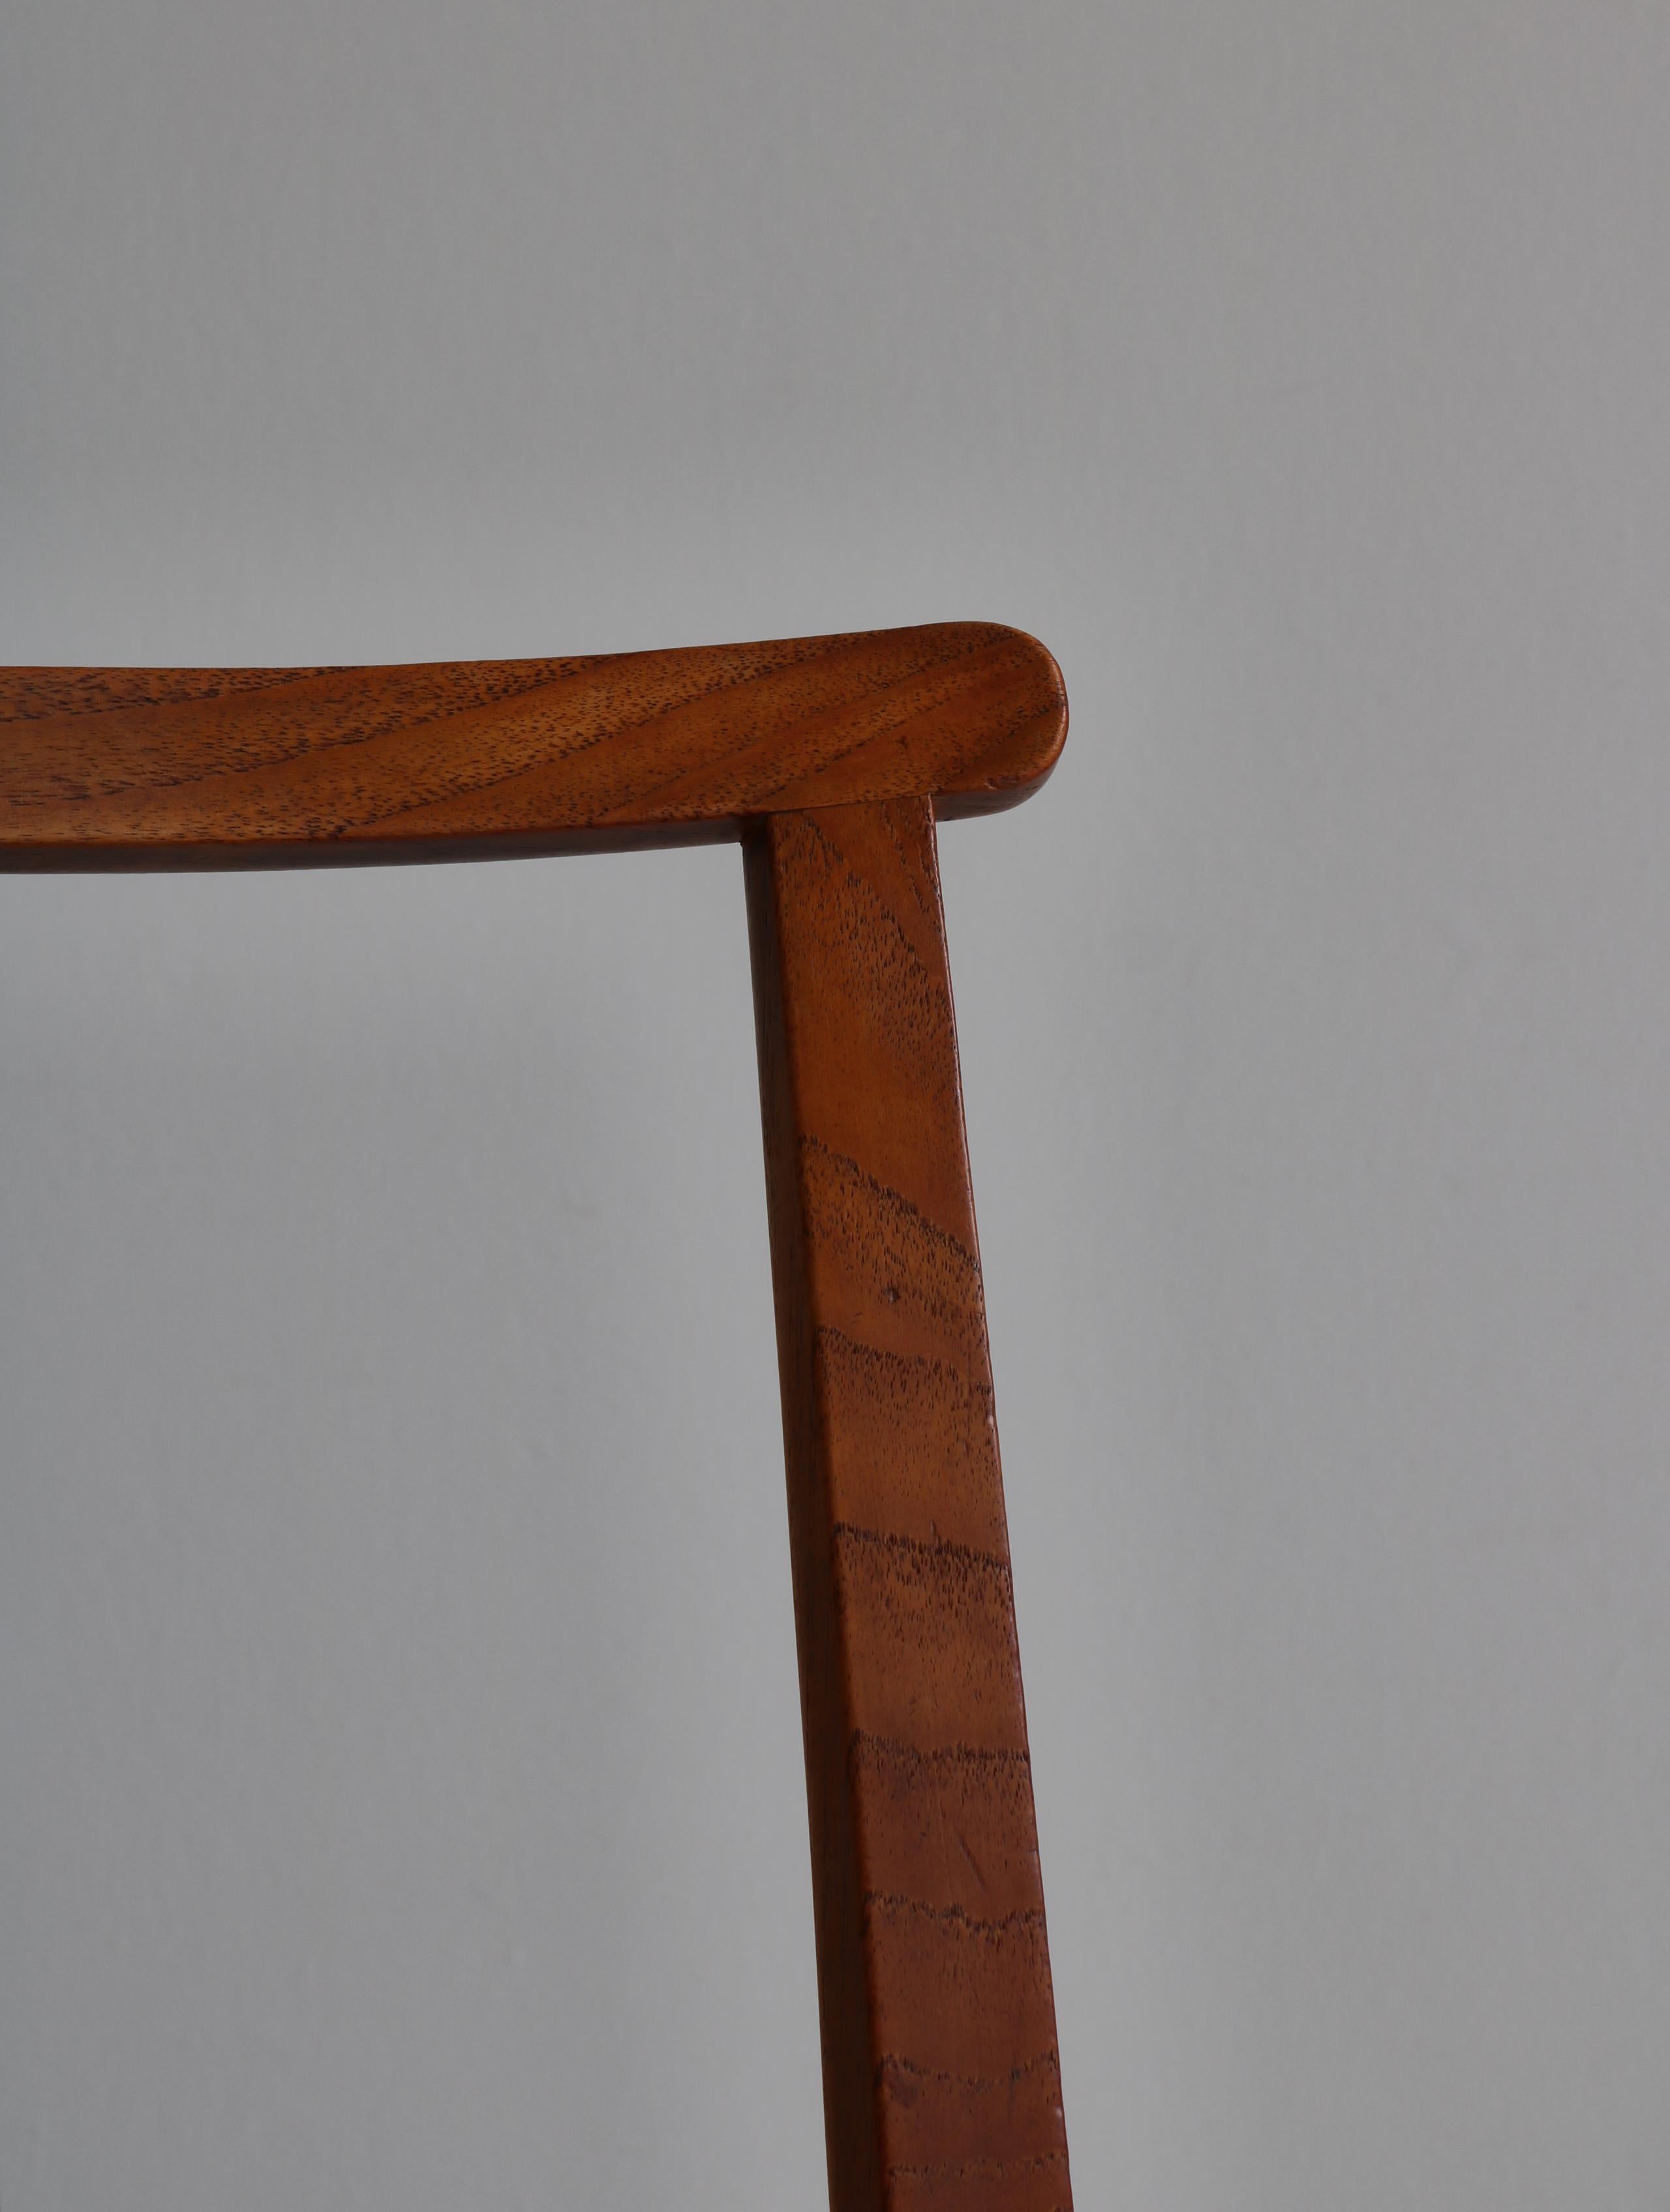 Set of Six Børge Mogensen Dining Chairs in Teak & Niger Leather, 1939, Denmark For Sale 10